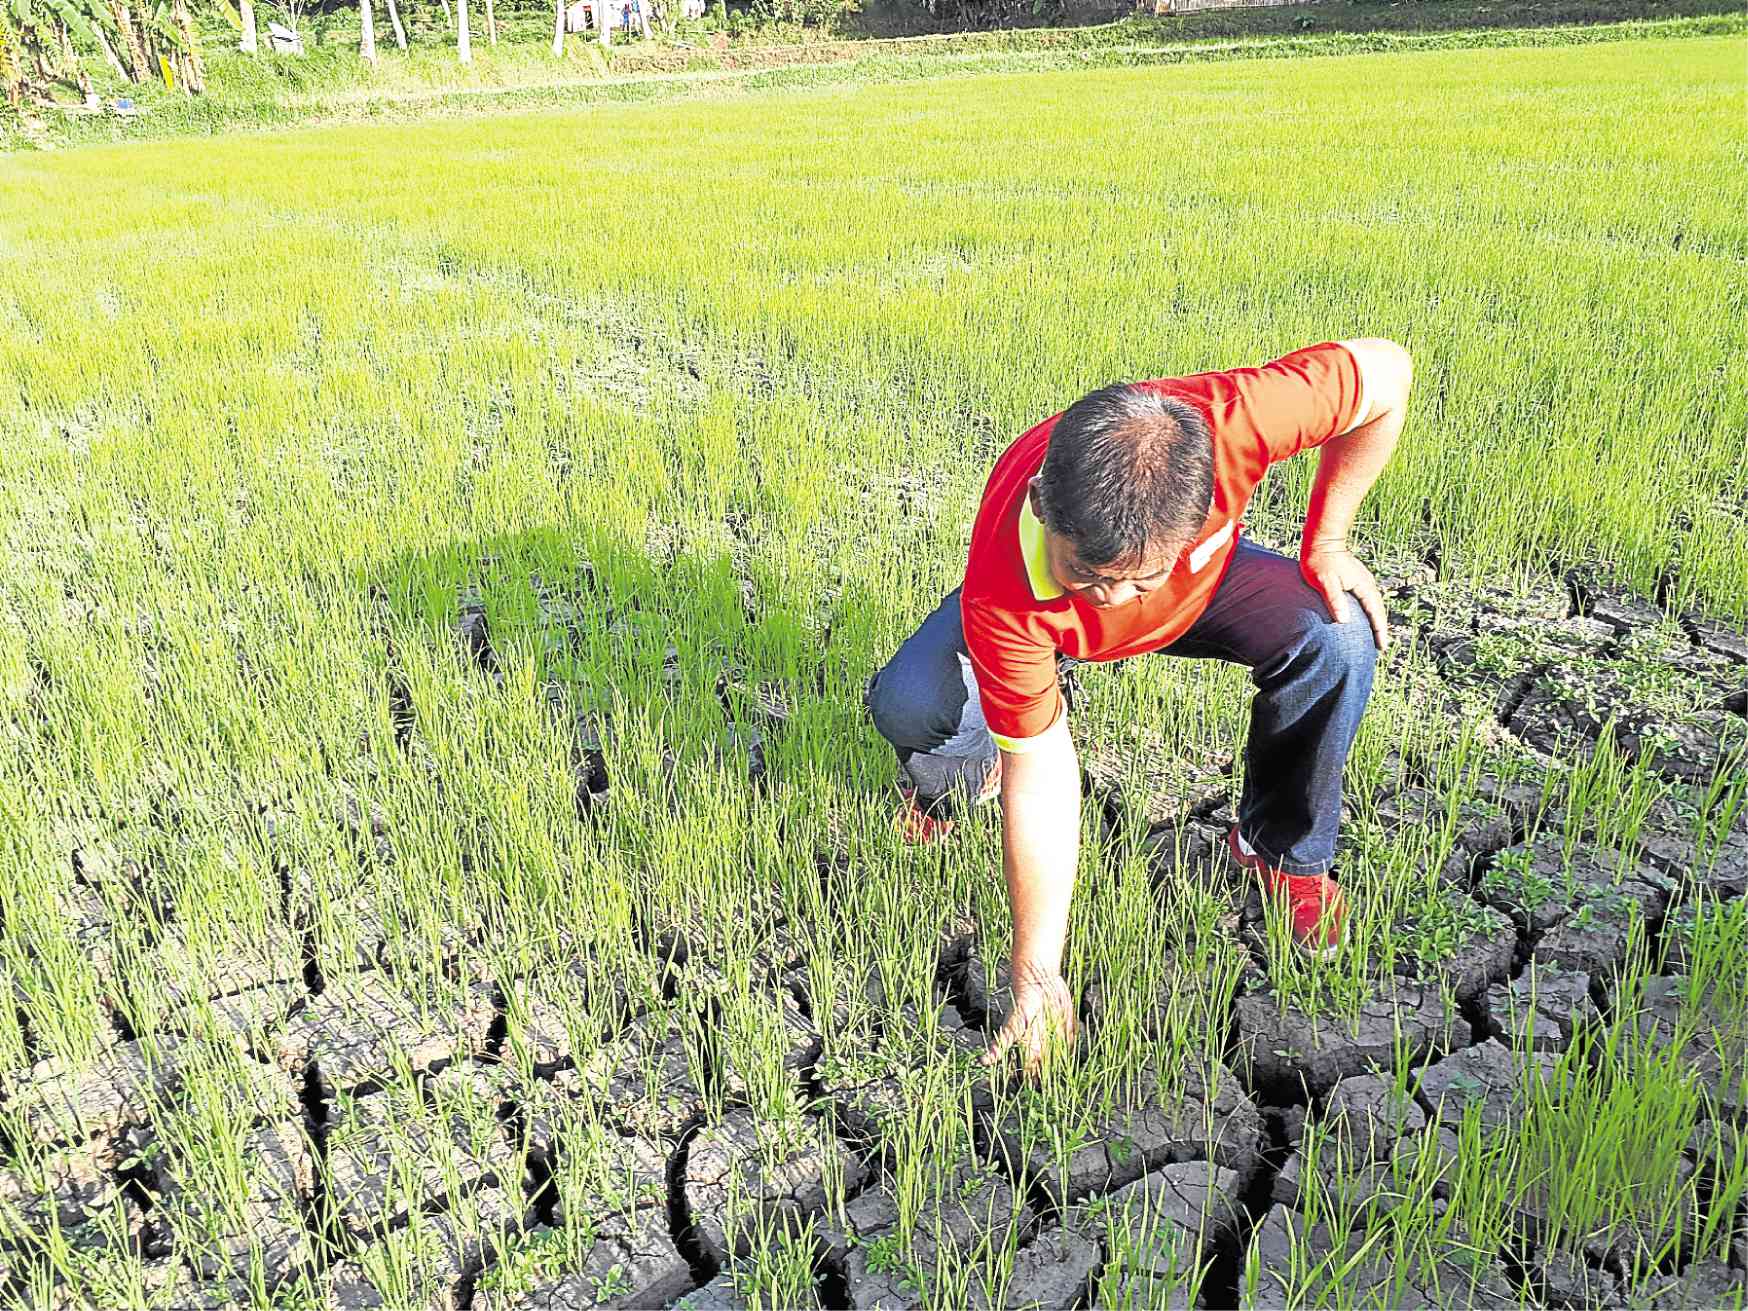 Subsidies, warning systems needed for El Niño, say climate activists